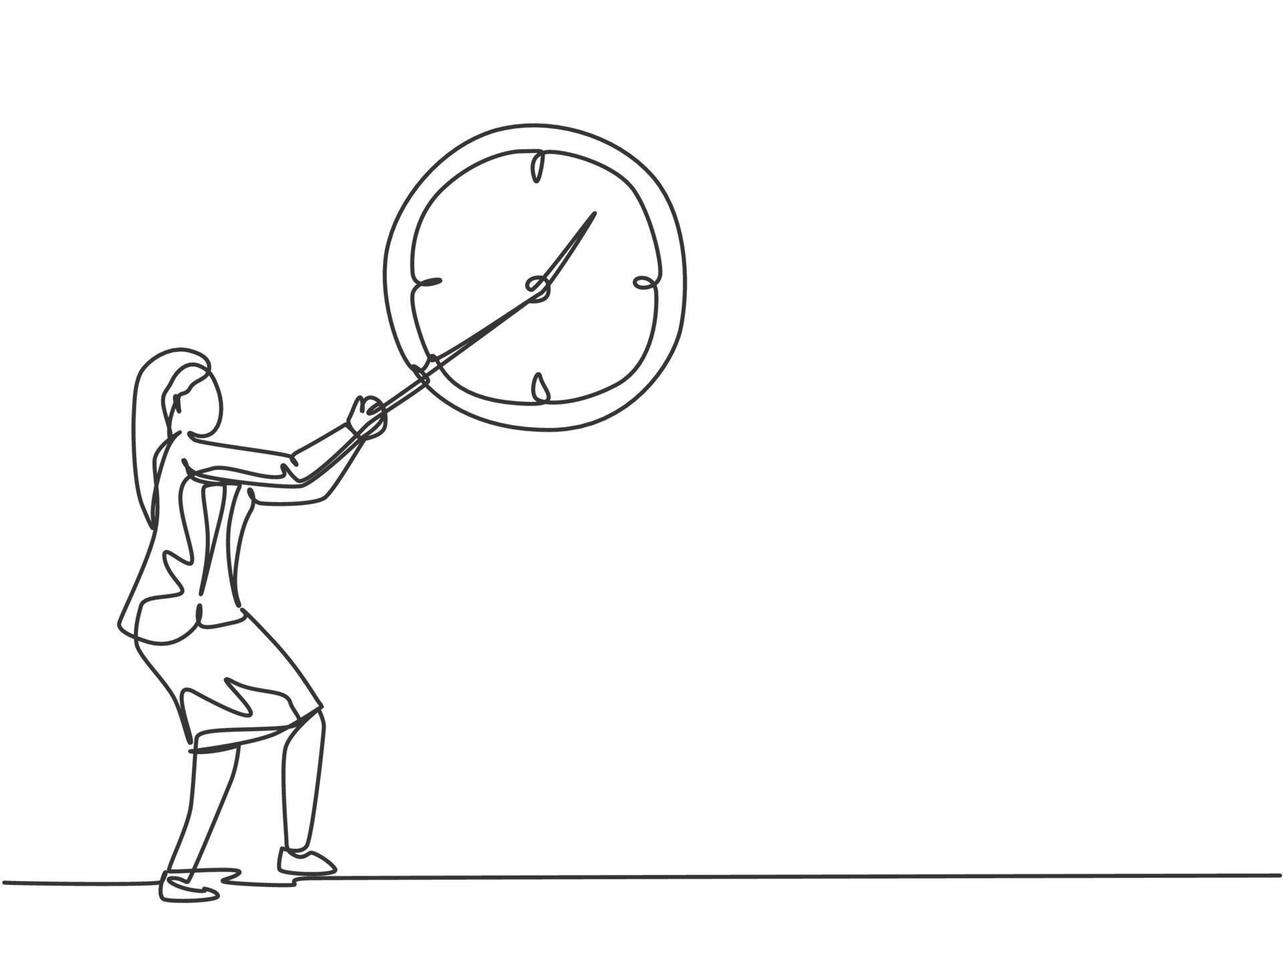 Continuous one line drawing young woman worker pulling clockwise of big analog wall clock with rope. Time management business minimalist concept. Single line draw design vector graphic illustration.